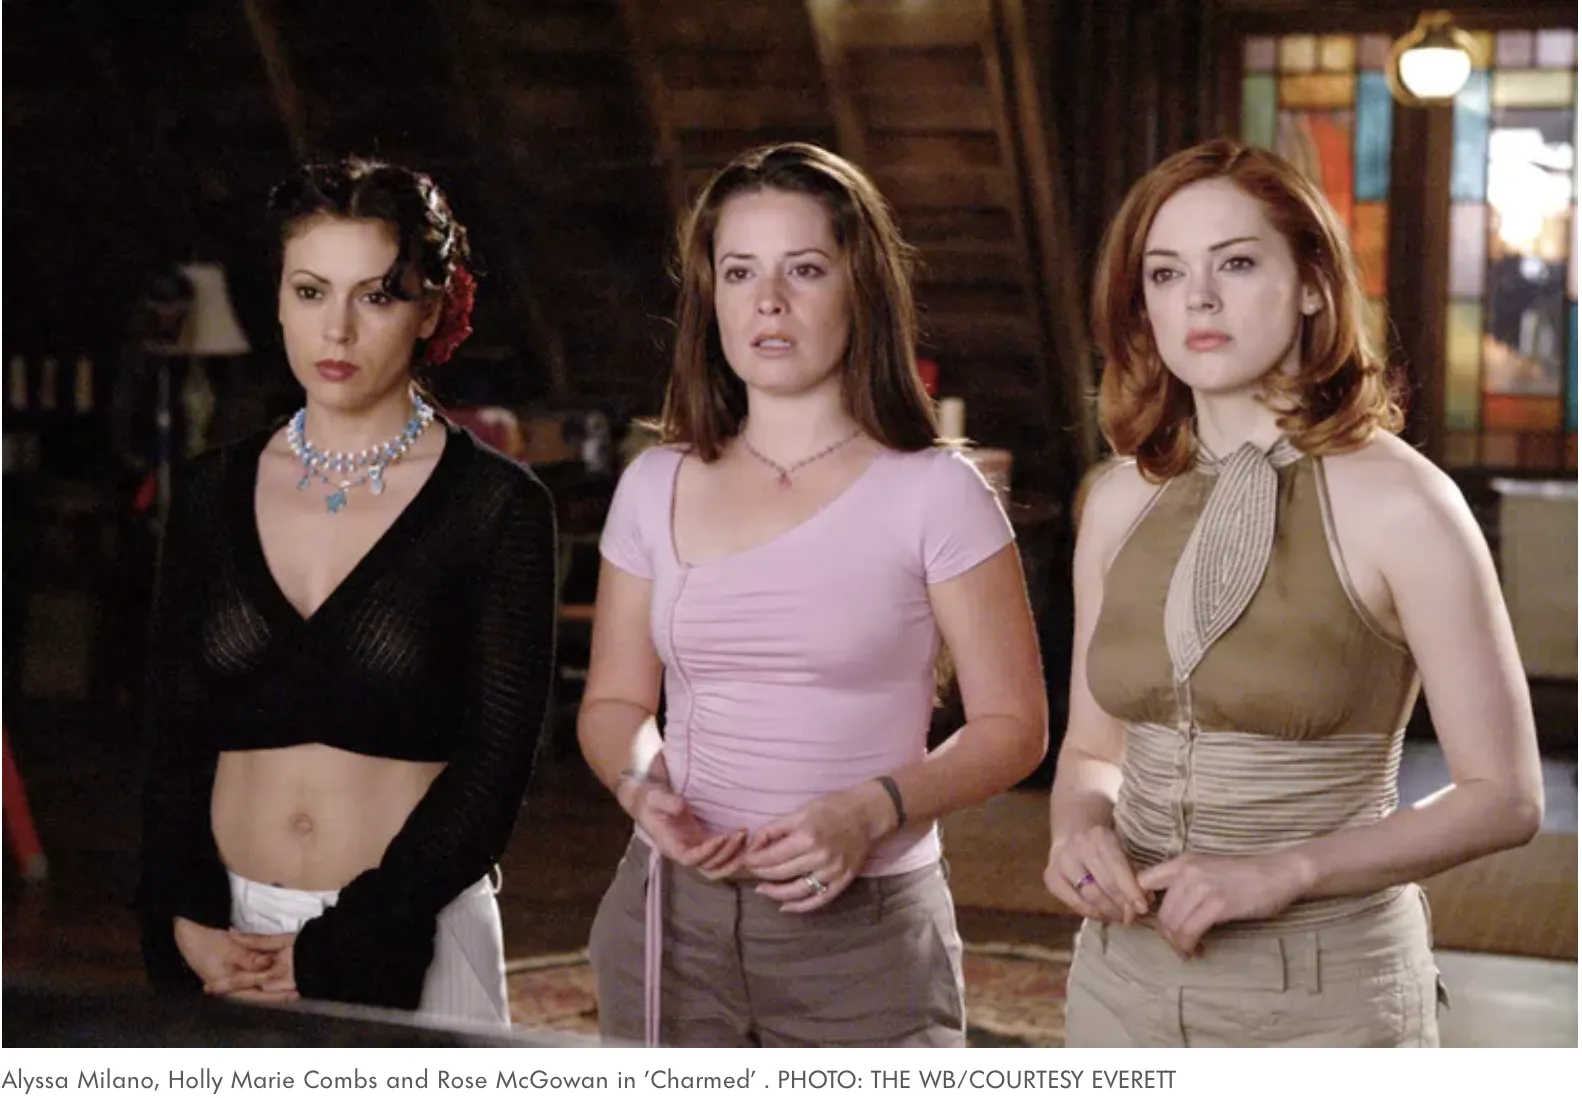 The Cast of 'Charmed': Where Are They Now?